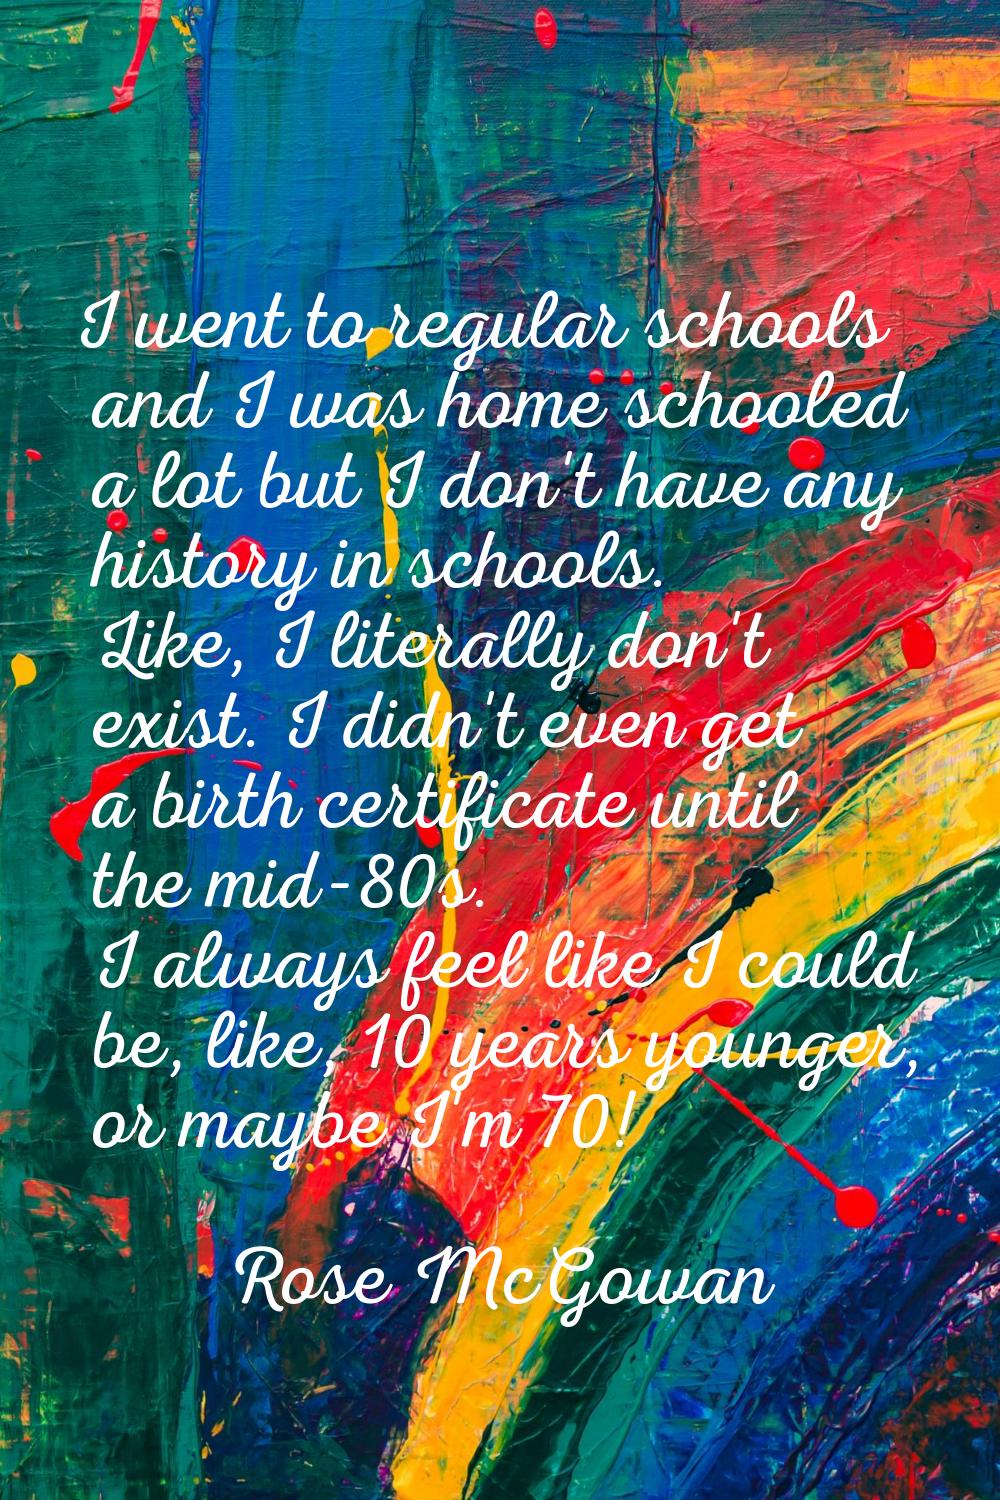 I went to regular schools and I was home schooled a lot but I don't have any history in schools. Li